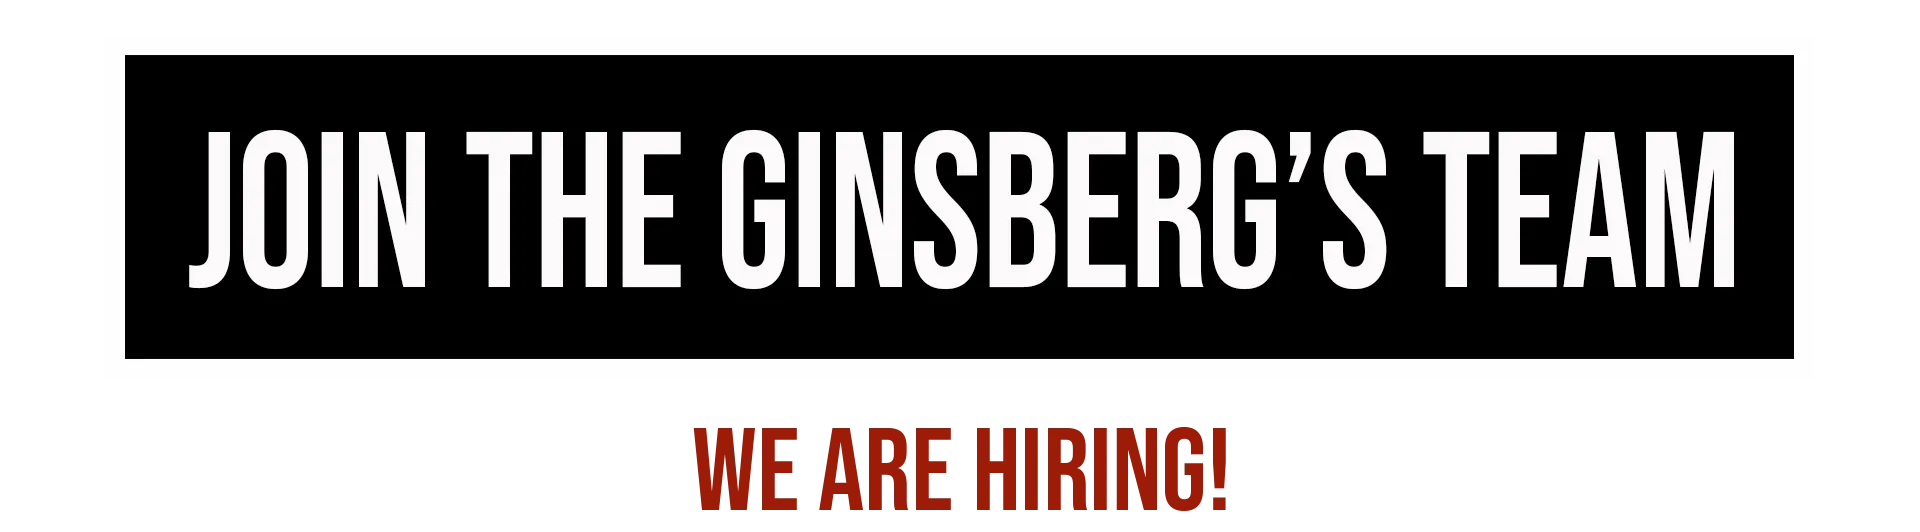 Ginsberg's is Hiring Jobs Careers for drivers, warehouse, customer service, financial accountant, cdl a drivers, forklift operators, shift warehouse workers and more